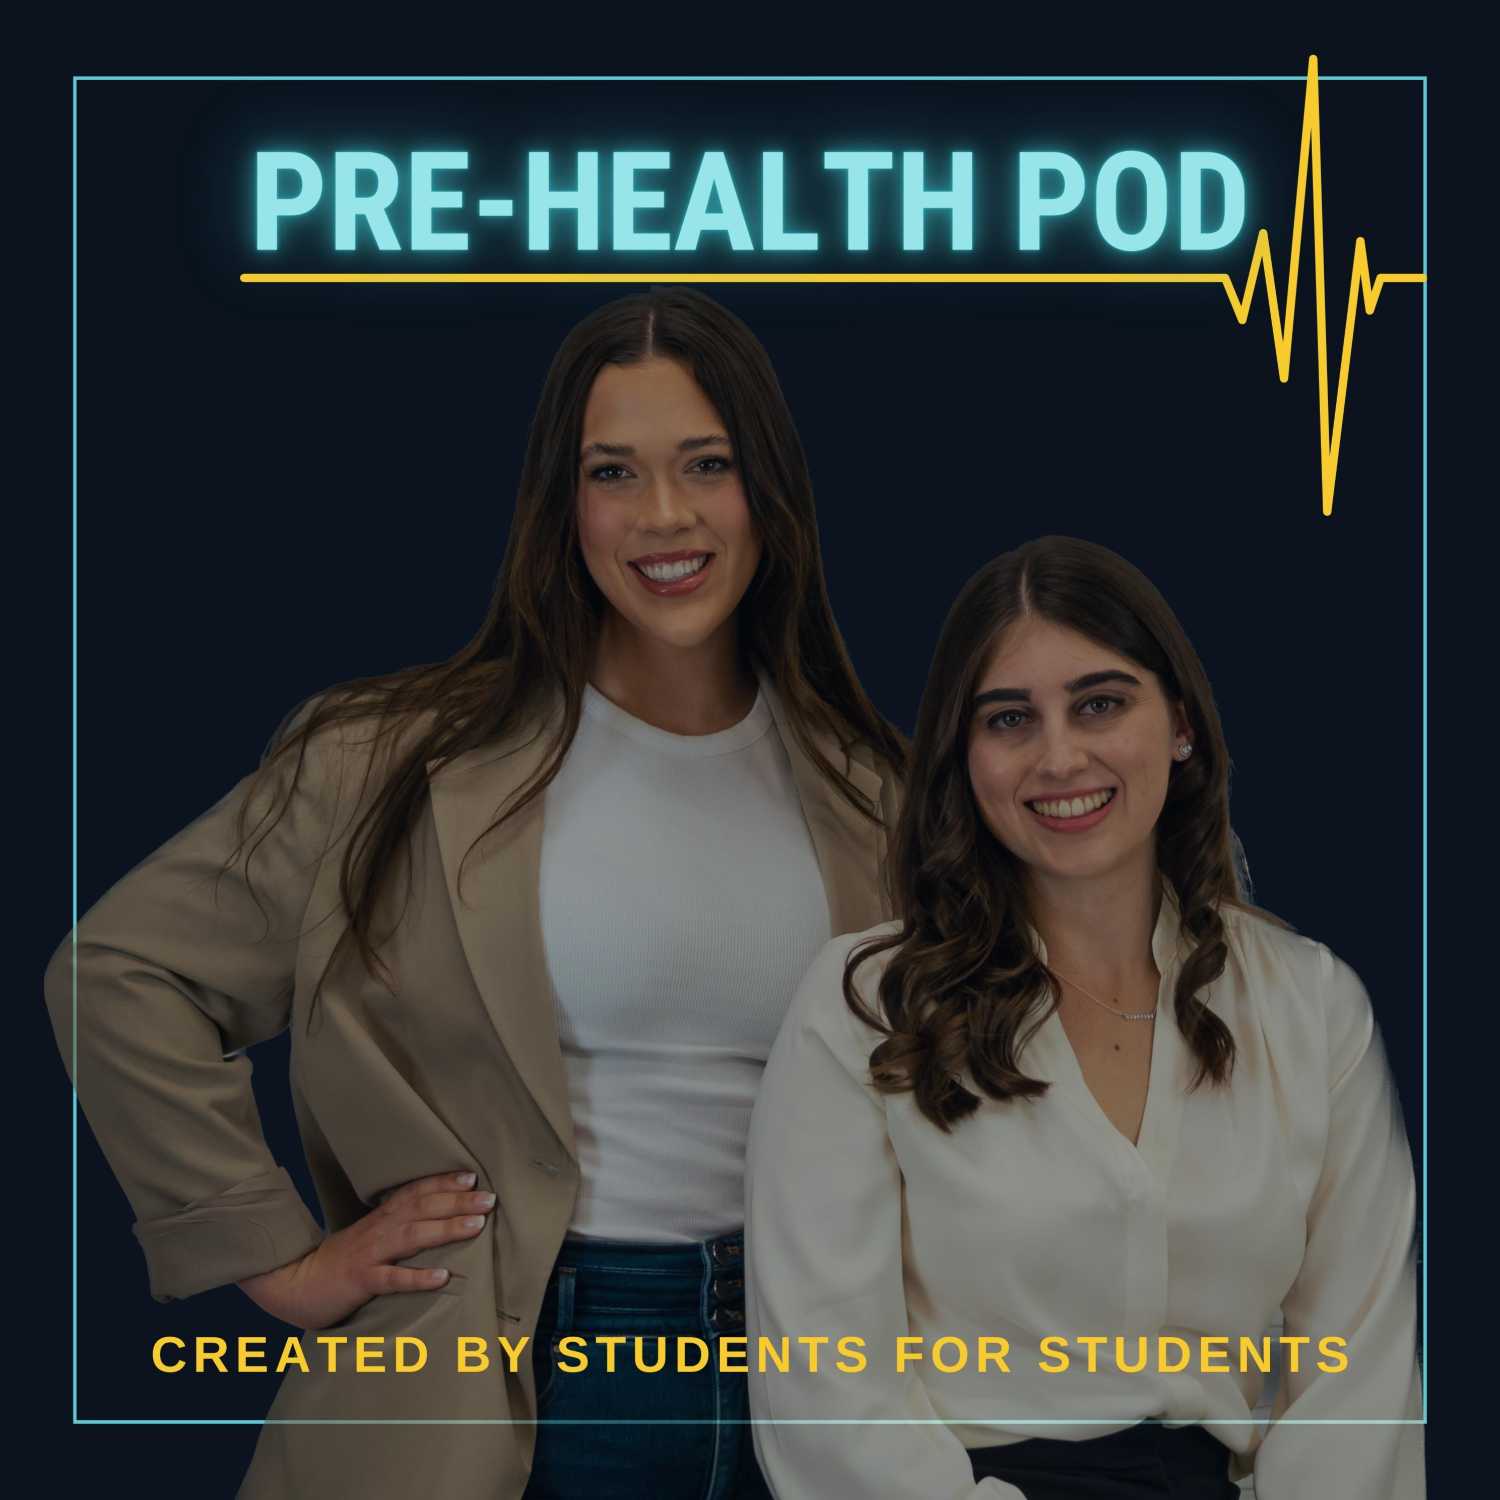 Get Research Experience Empowering Premeds!